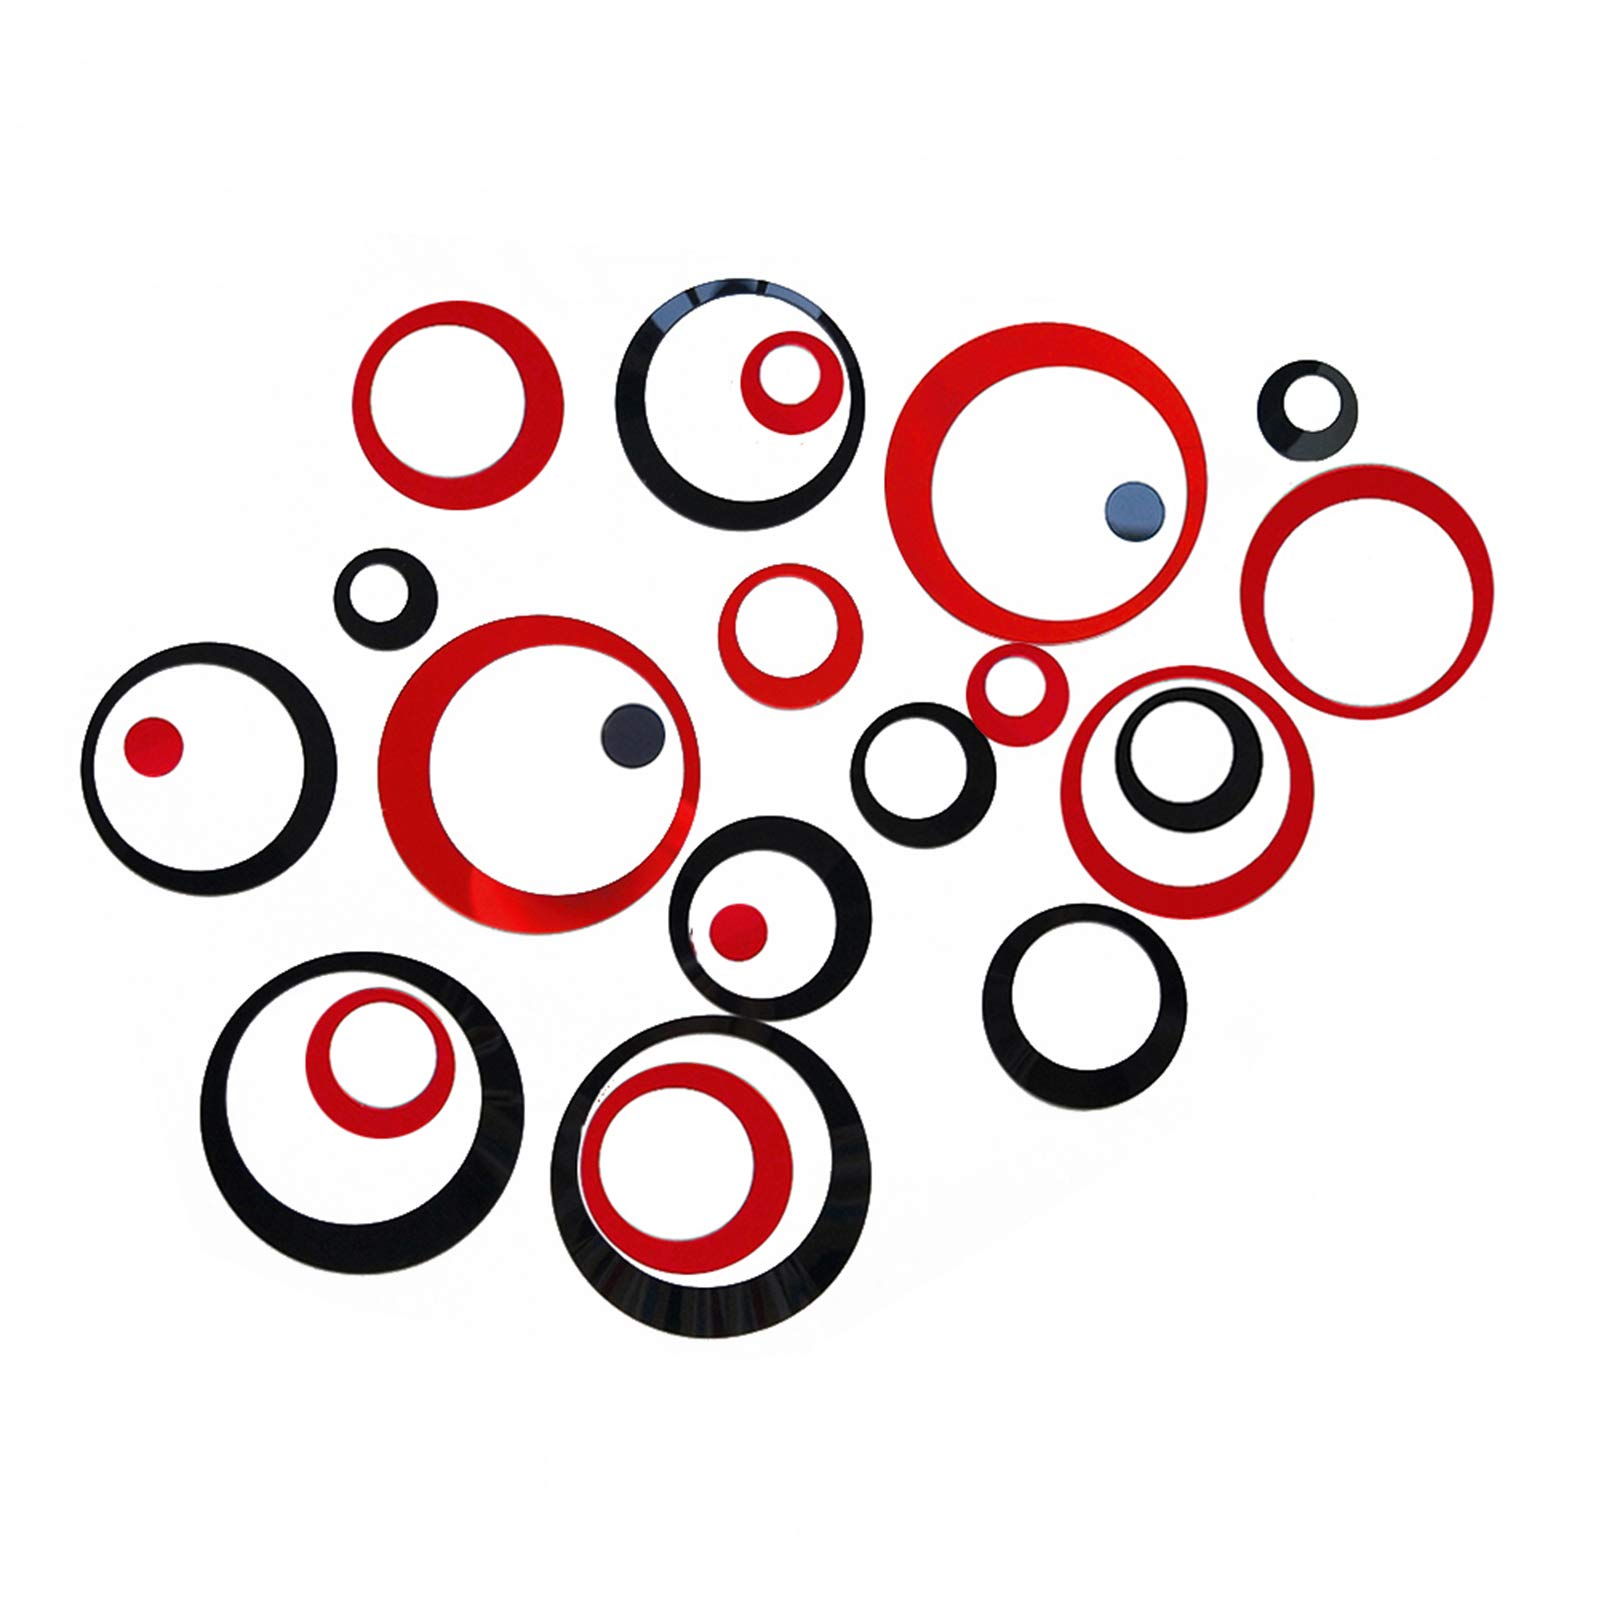 Book Cover 24Pcs Acrylic Circle Mirror Wall Stickers DIY Decals Modern Art Mural for Home Living Room Bedroom Decor Black and Red 24pcs(black+ Red)